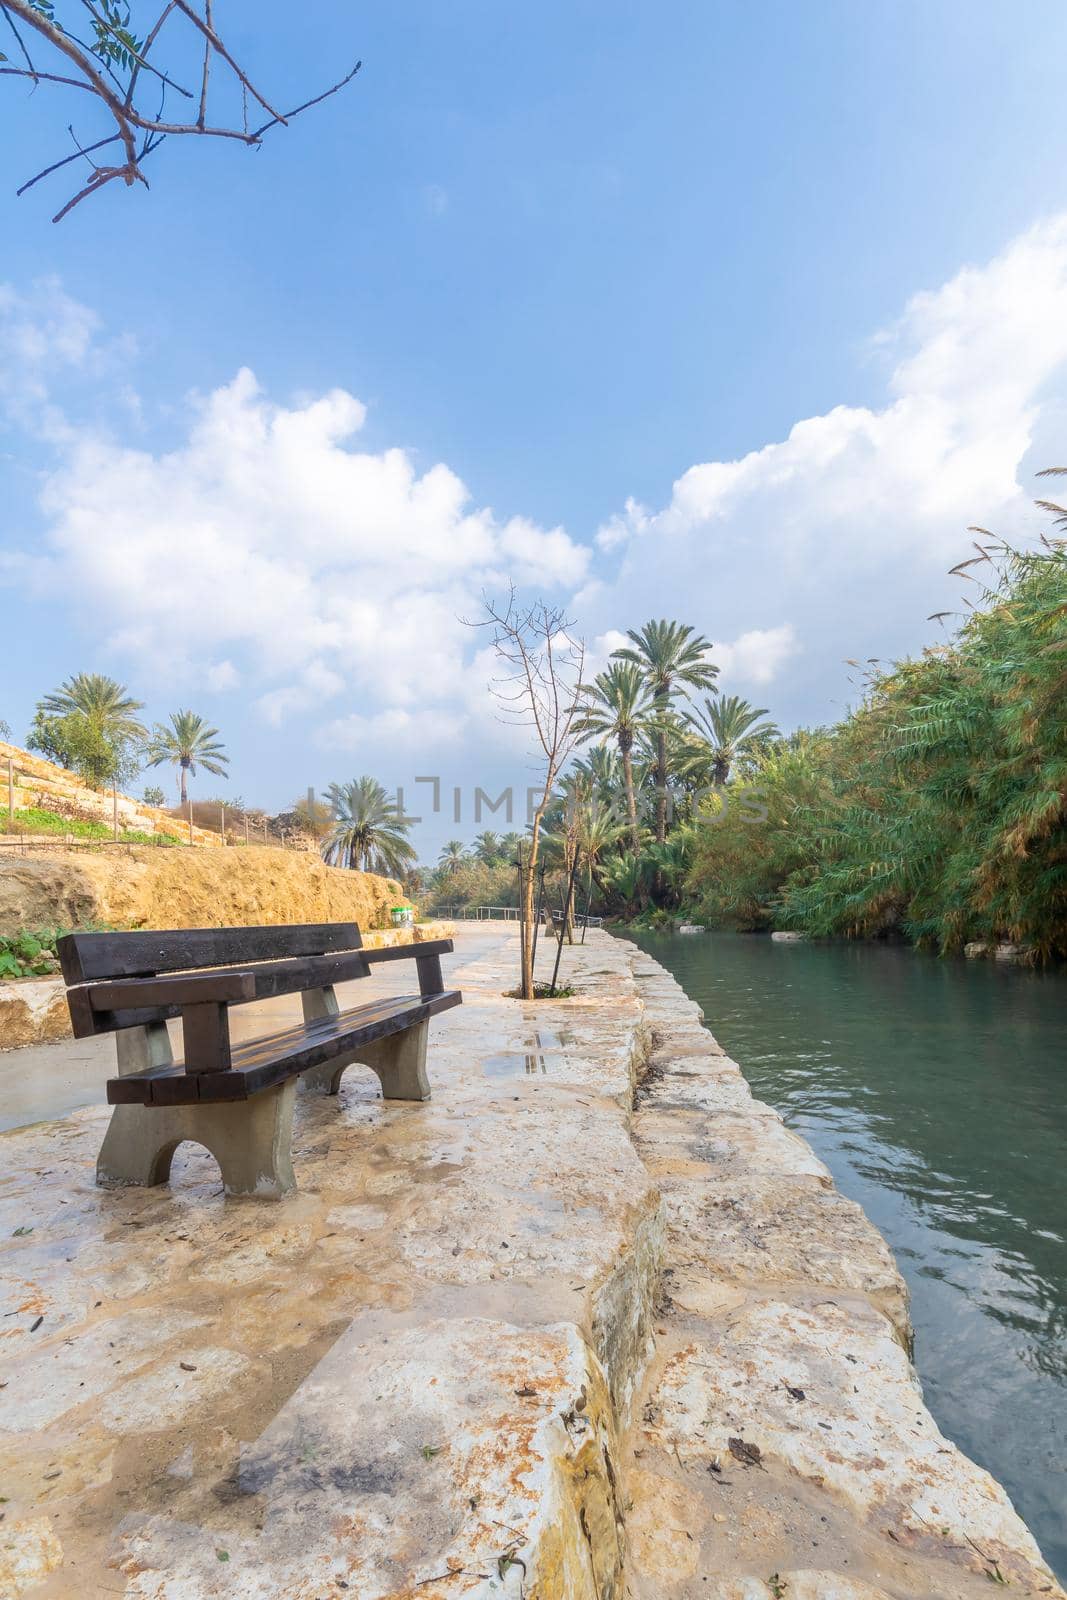 Footpath and a bench along the Amal stream, in Gan HaShlosha National Park (Sakhne), in the Bet Shean Valley, Northern Israel